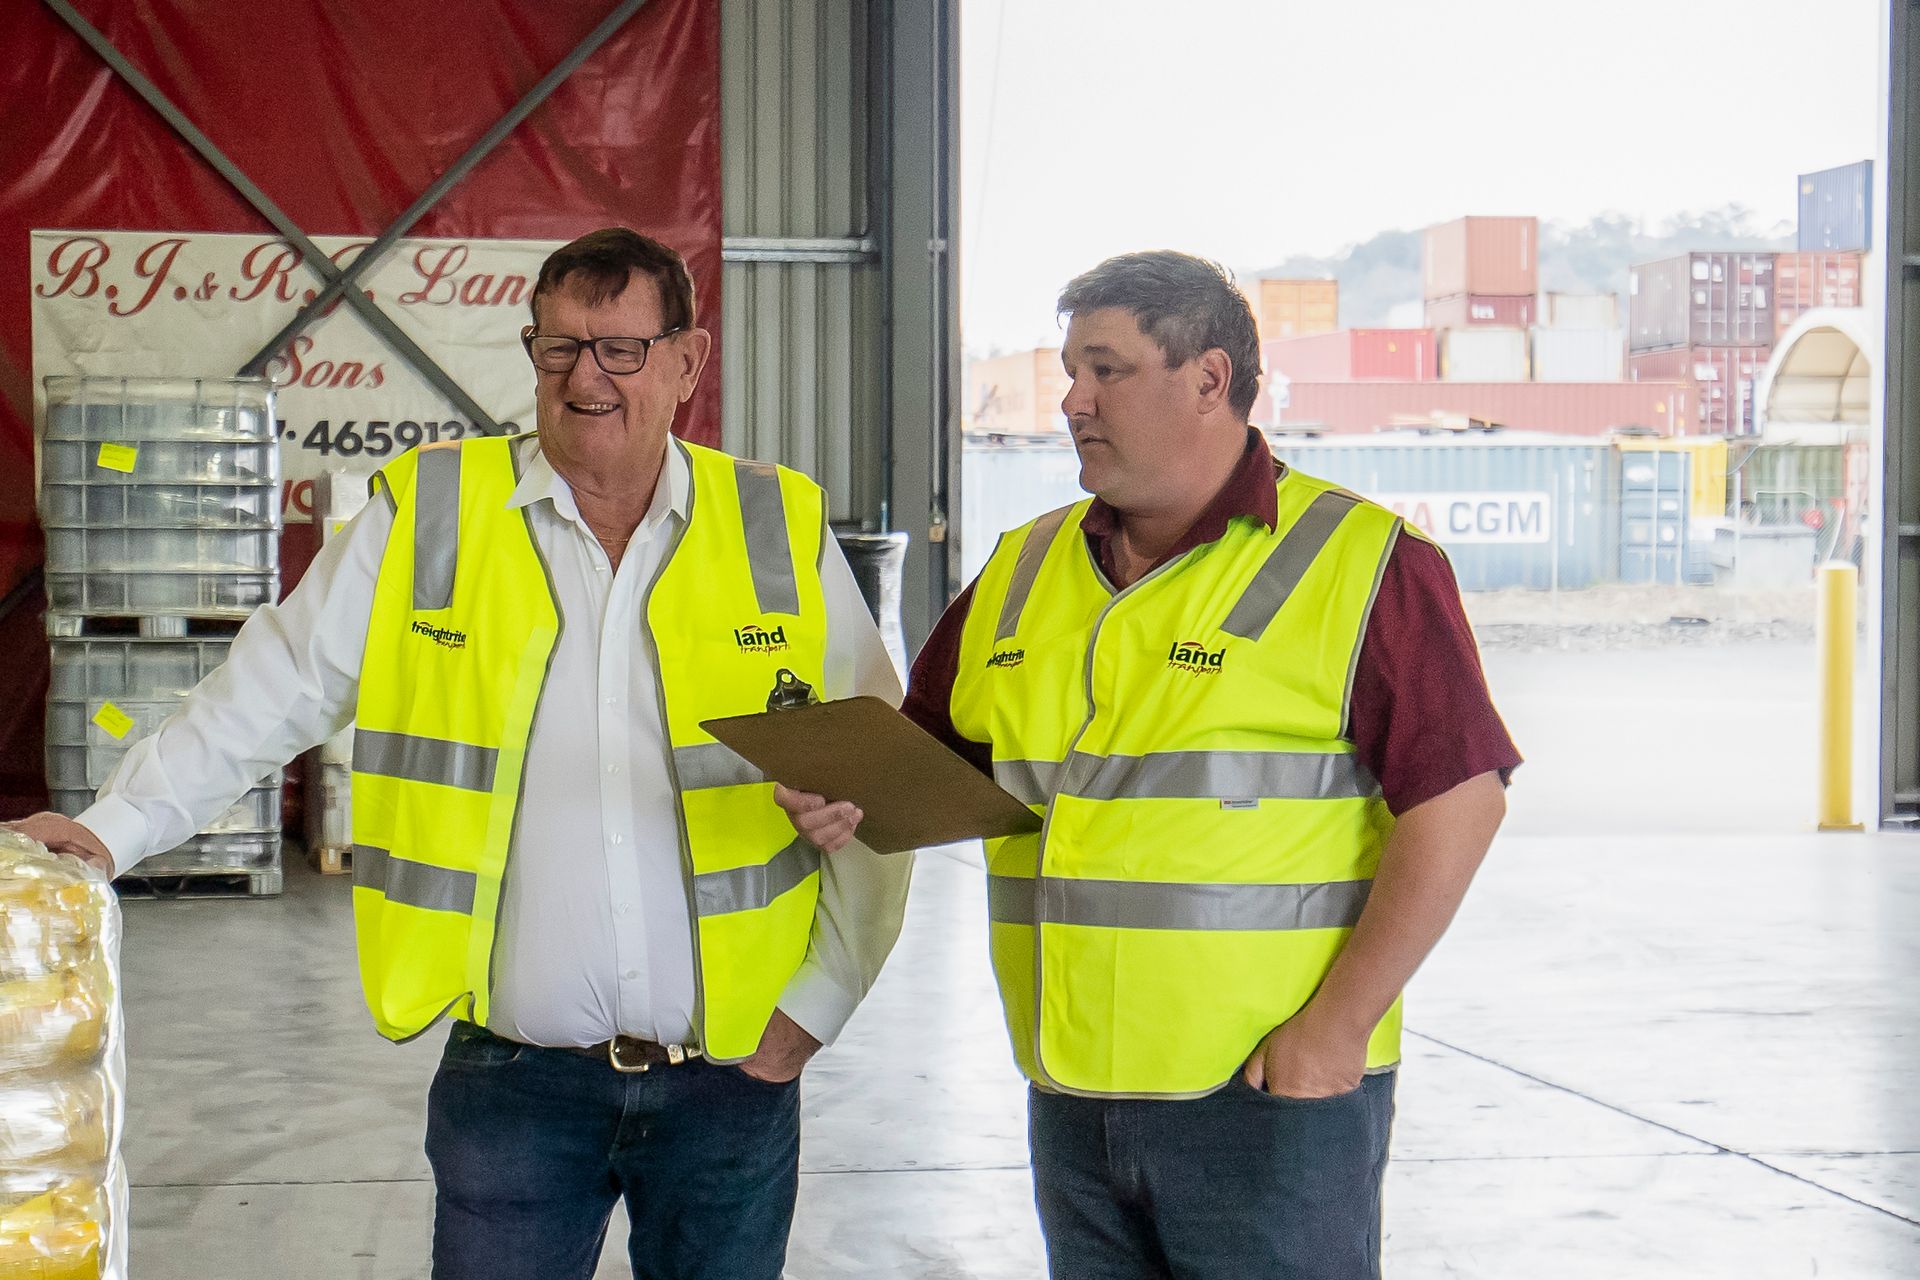 two men in yellow vests are standing next to each other in a warehouse .